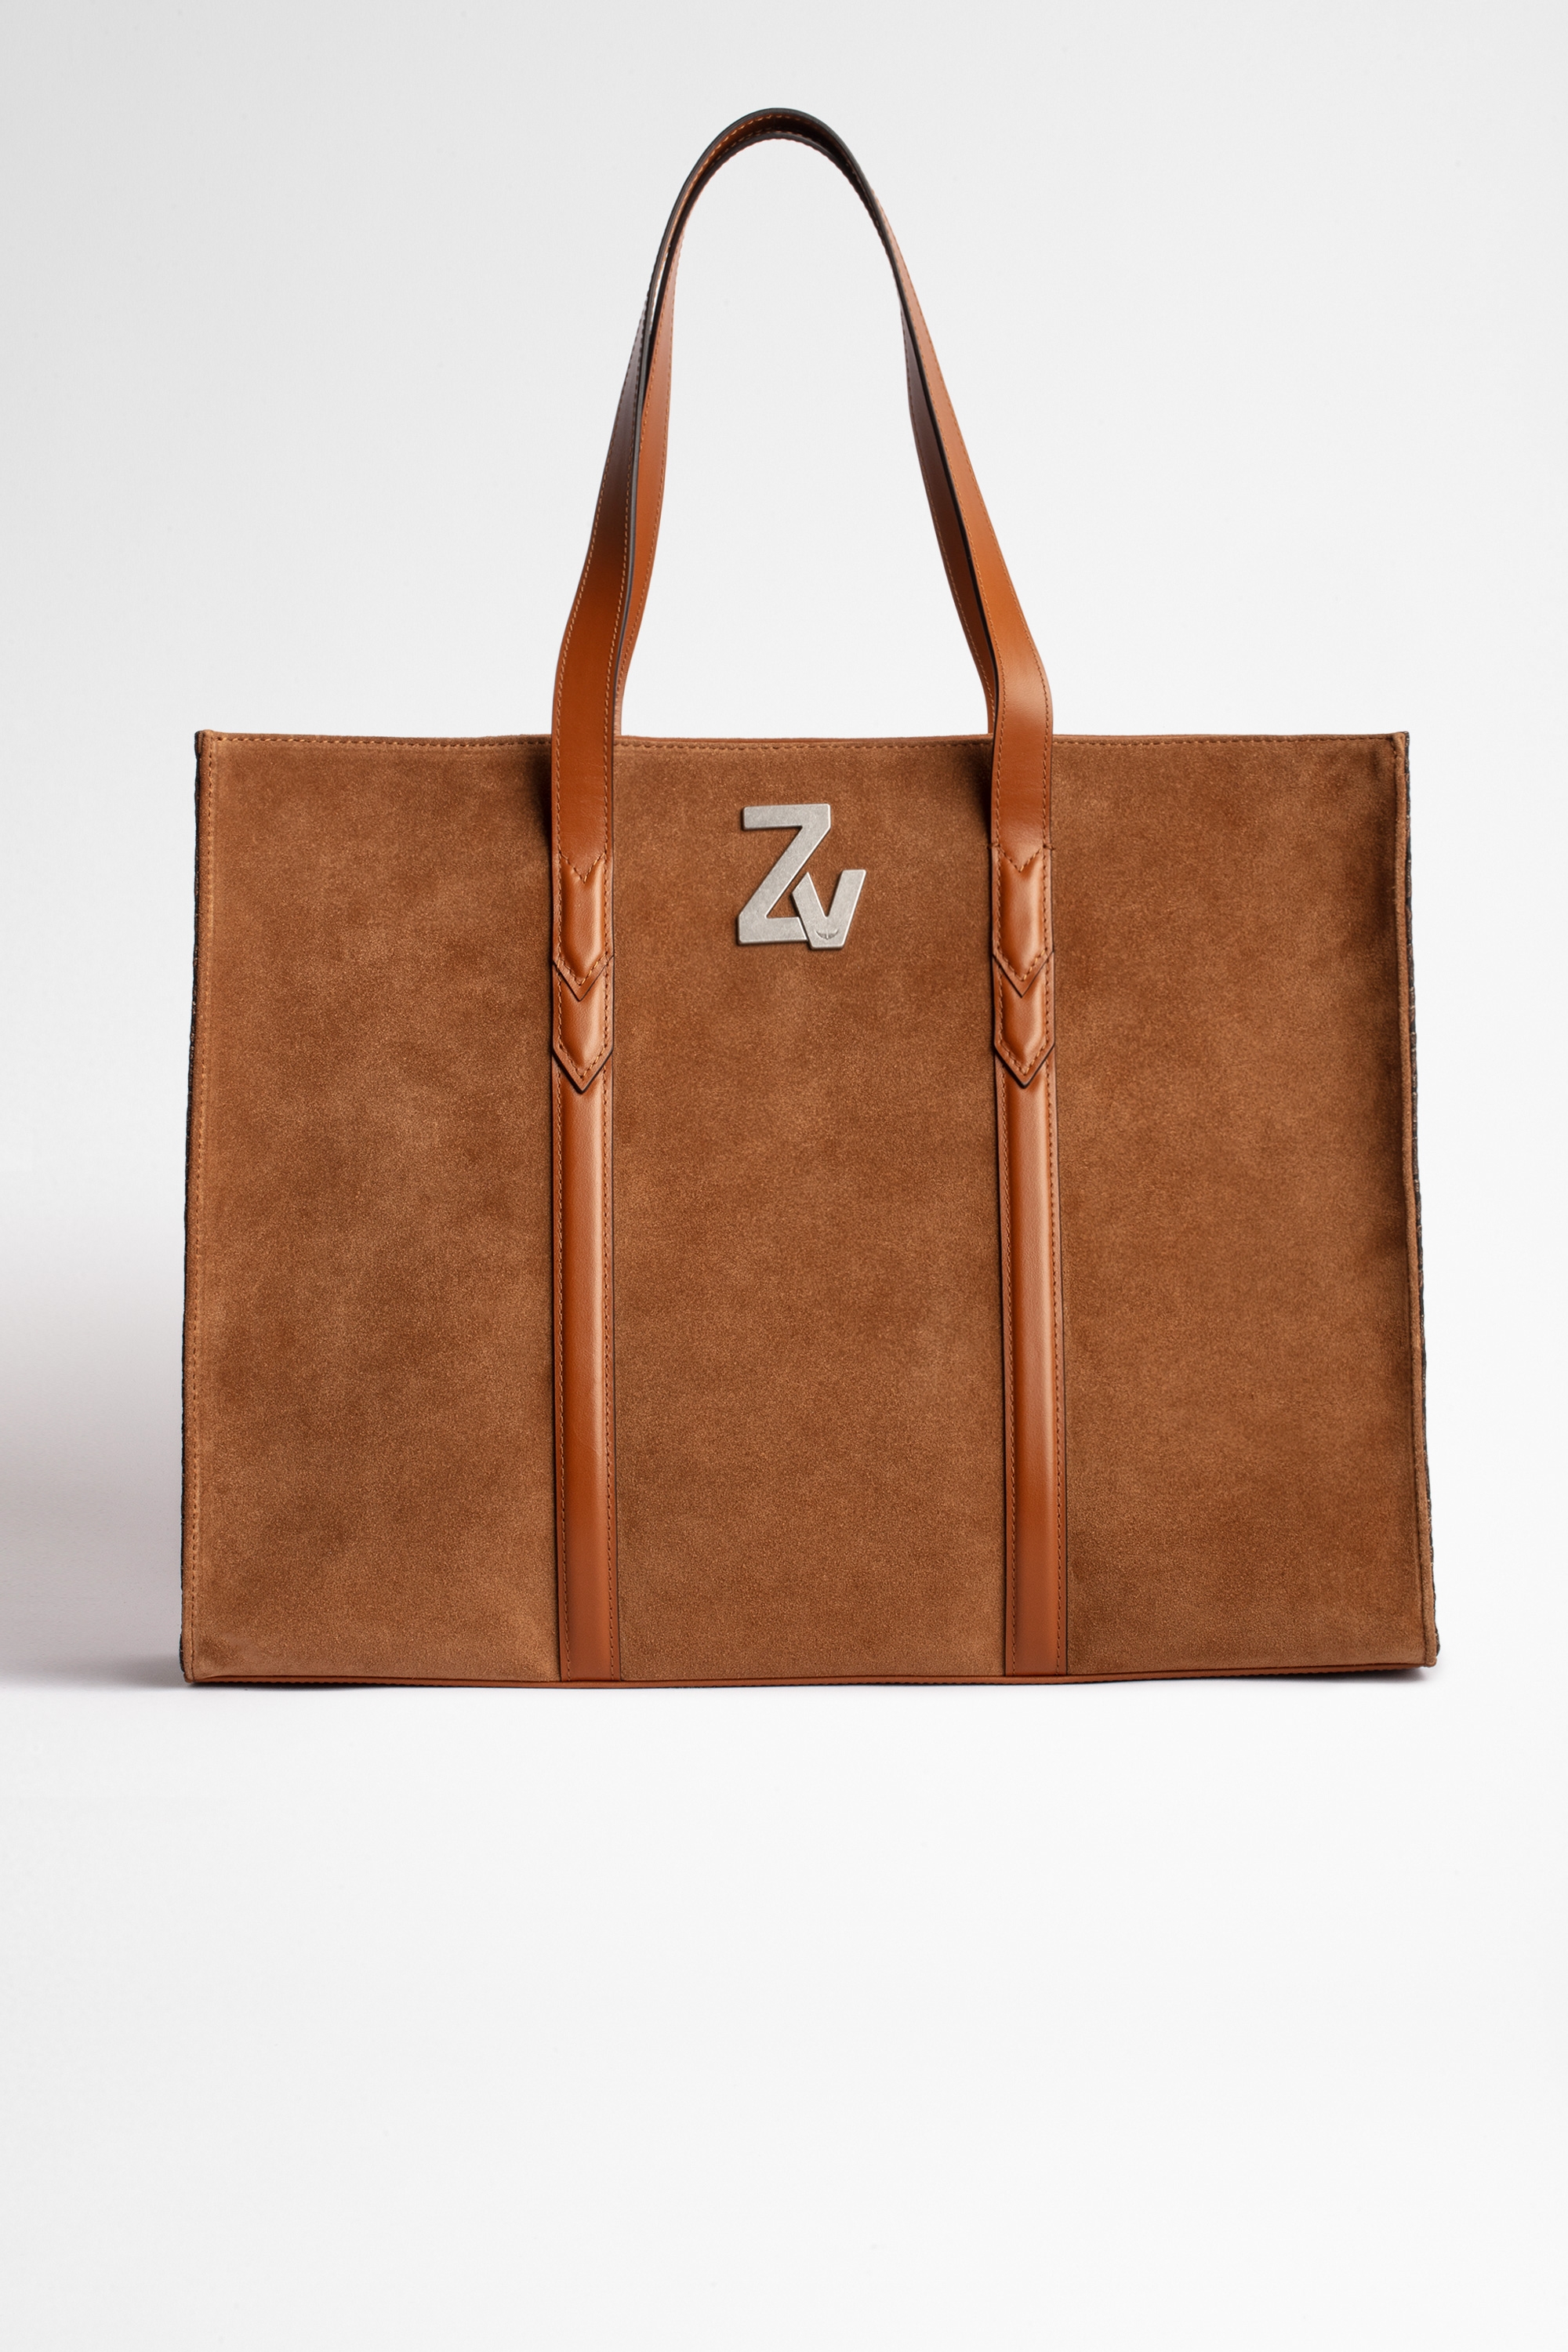 ZV Initiale Le Tote Bag